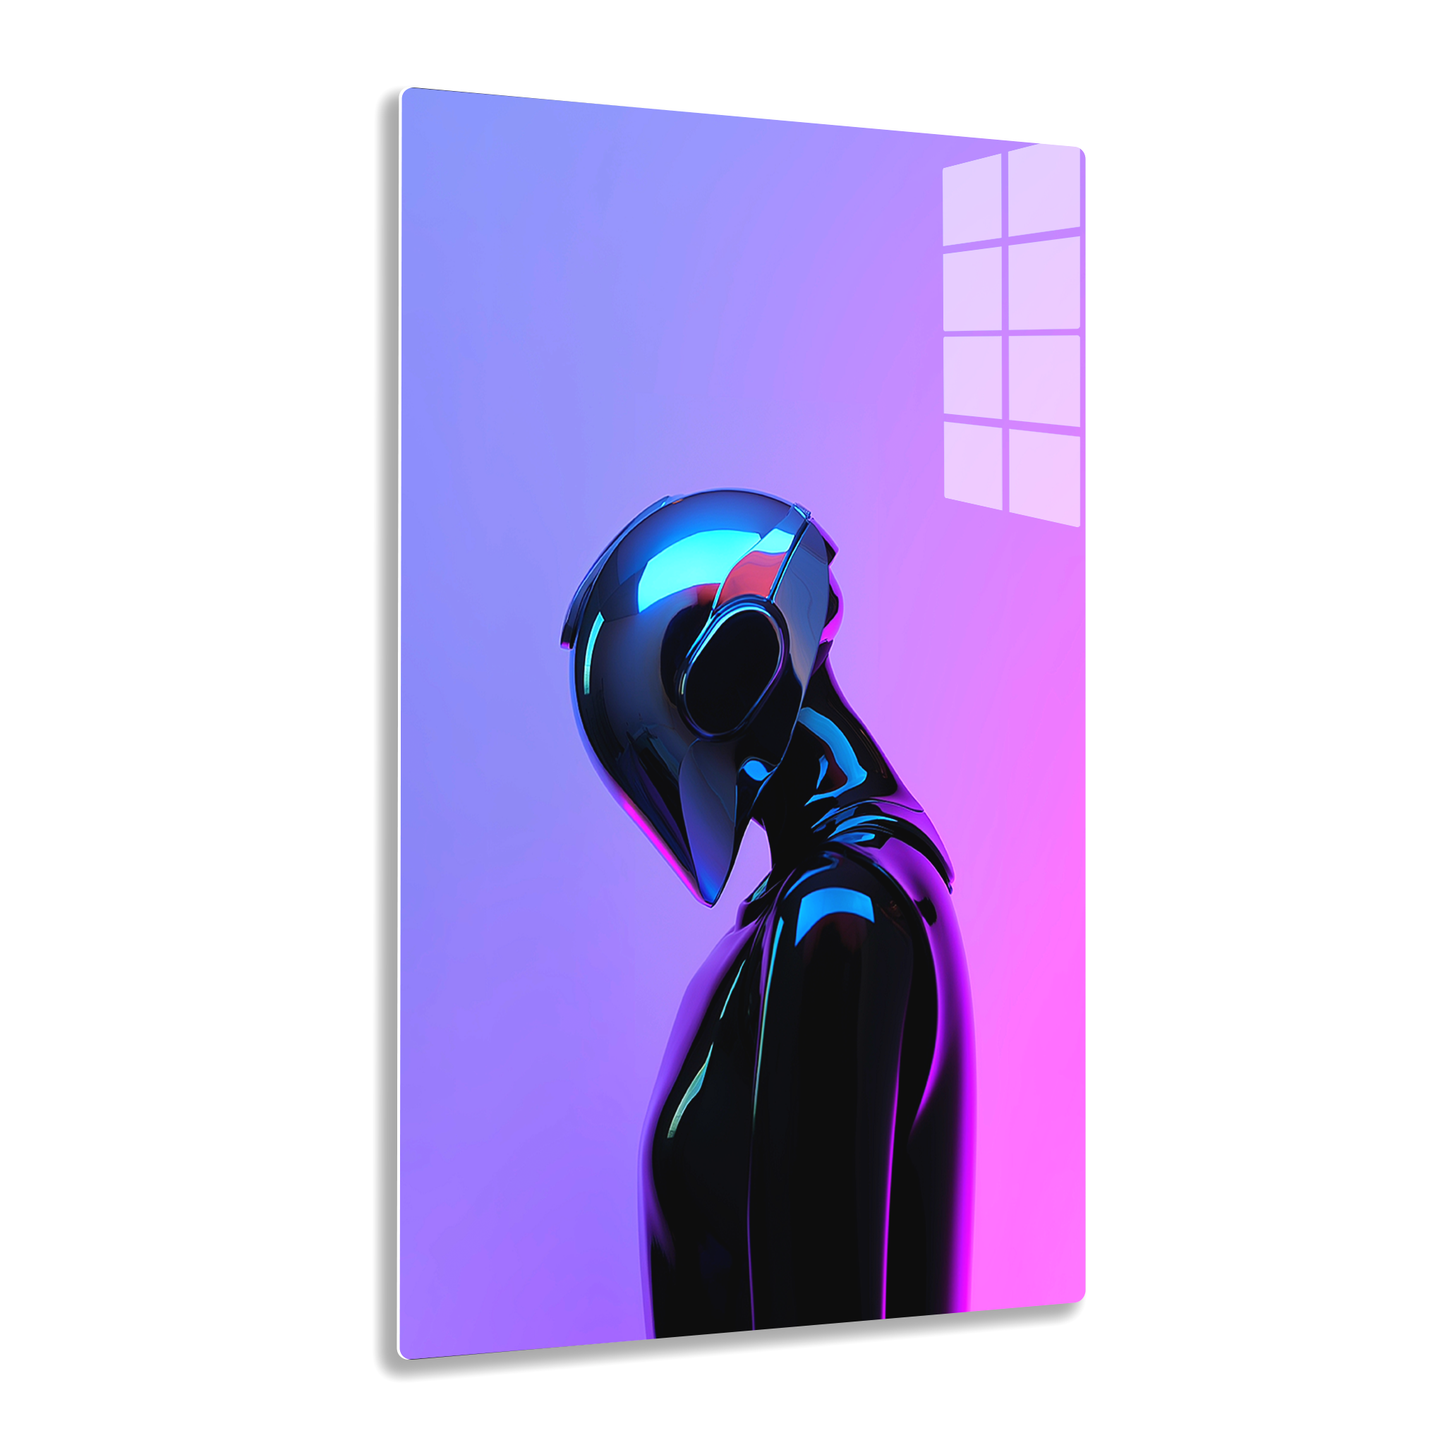 Neon Cyber Visor (Acrylic)Neon Cyber Visor acrylic print brings museum-quality art into your home. The crystal clear 1⁄4” acrylic panel gives a smooth glass-like finish for stunning prints. SRimaGallery